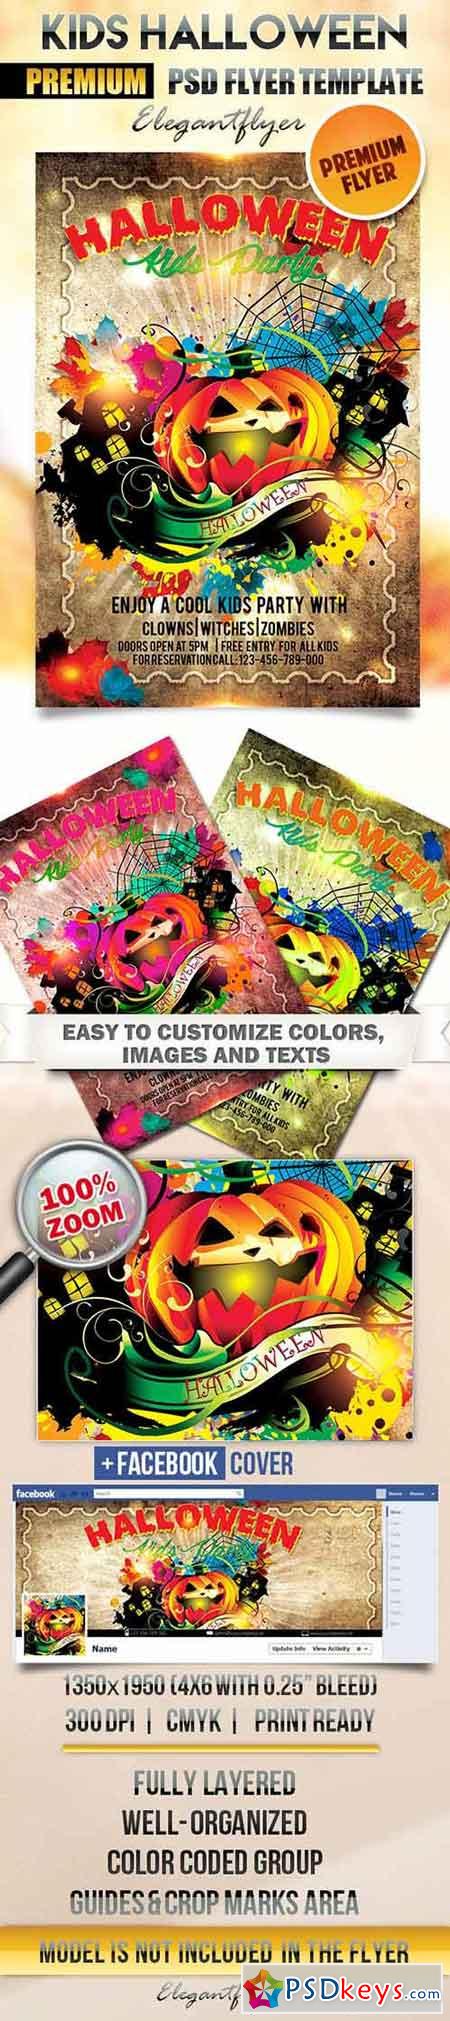 Kids Halloween Party Flyer PSD Template + Facebook Cover